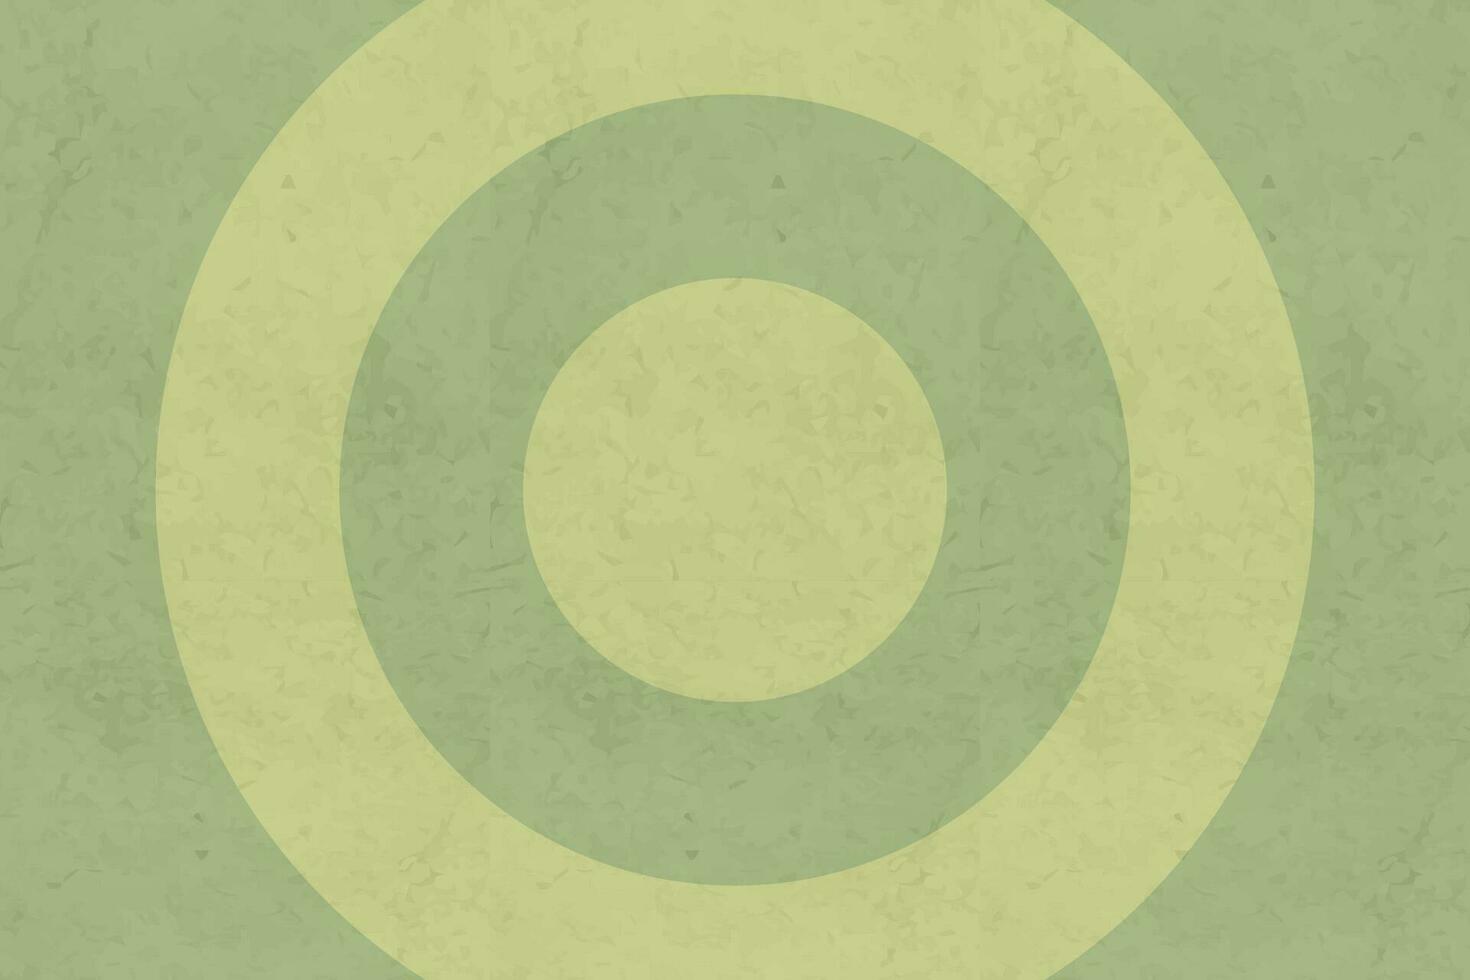 green aged target circles on textured surface vector